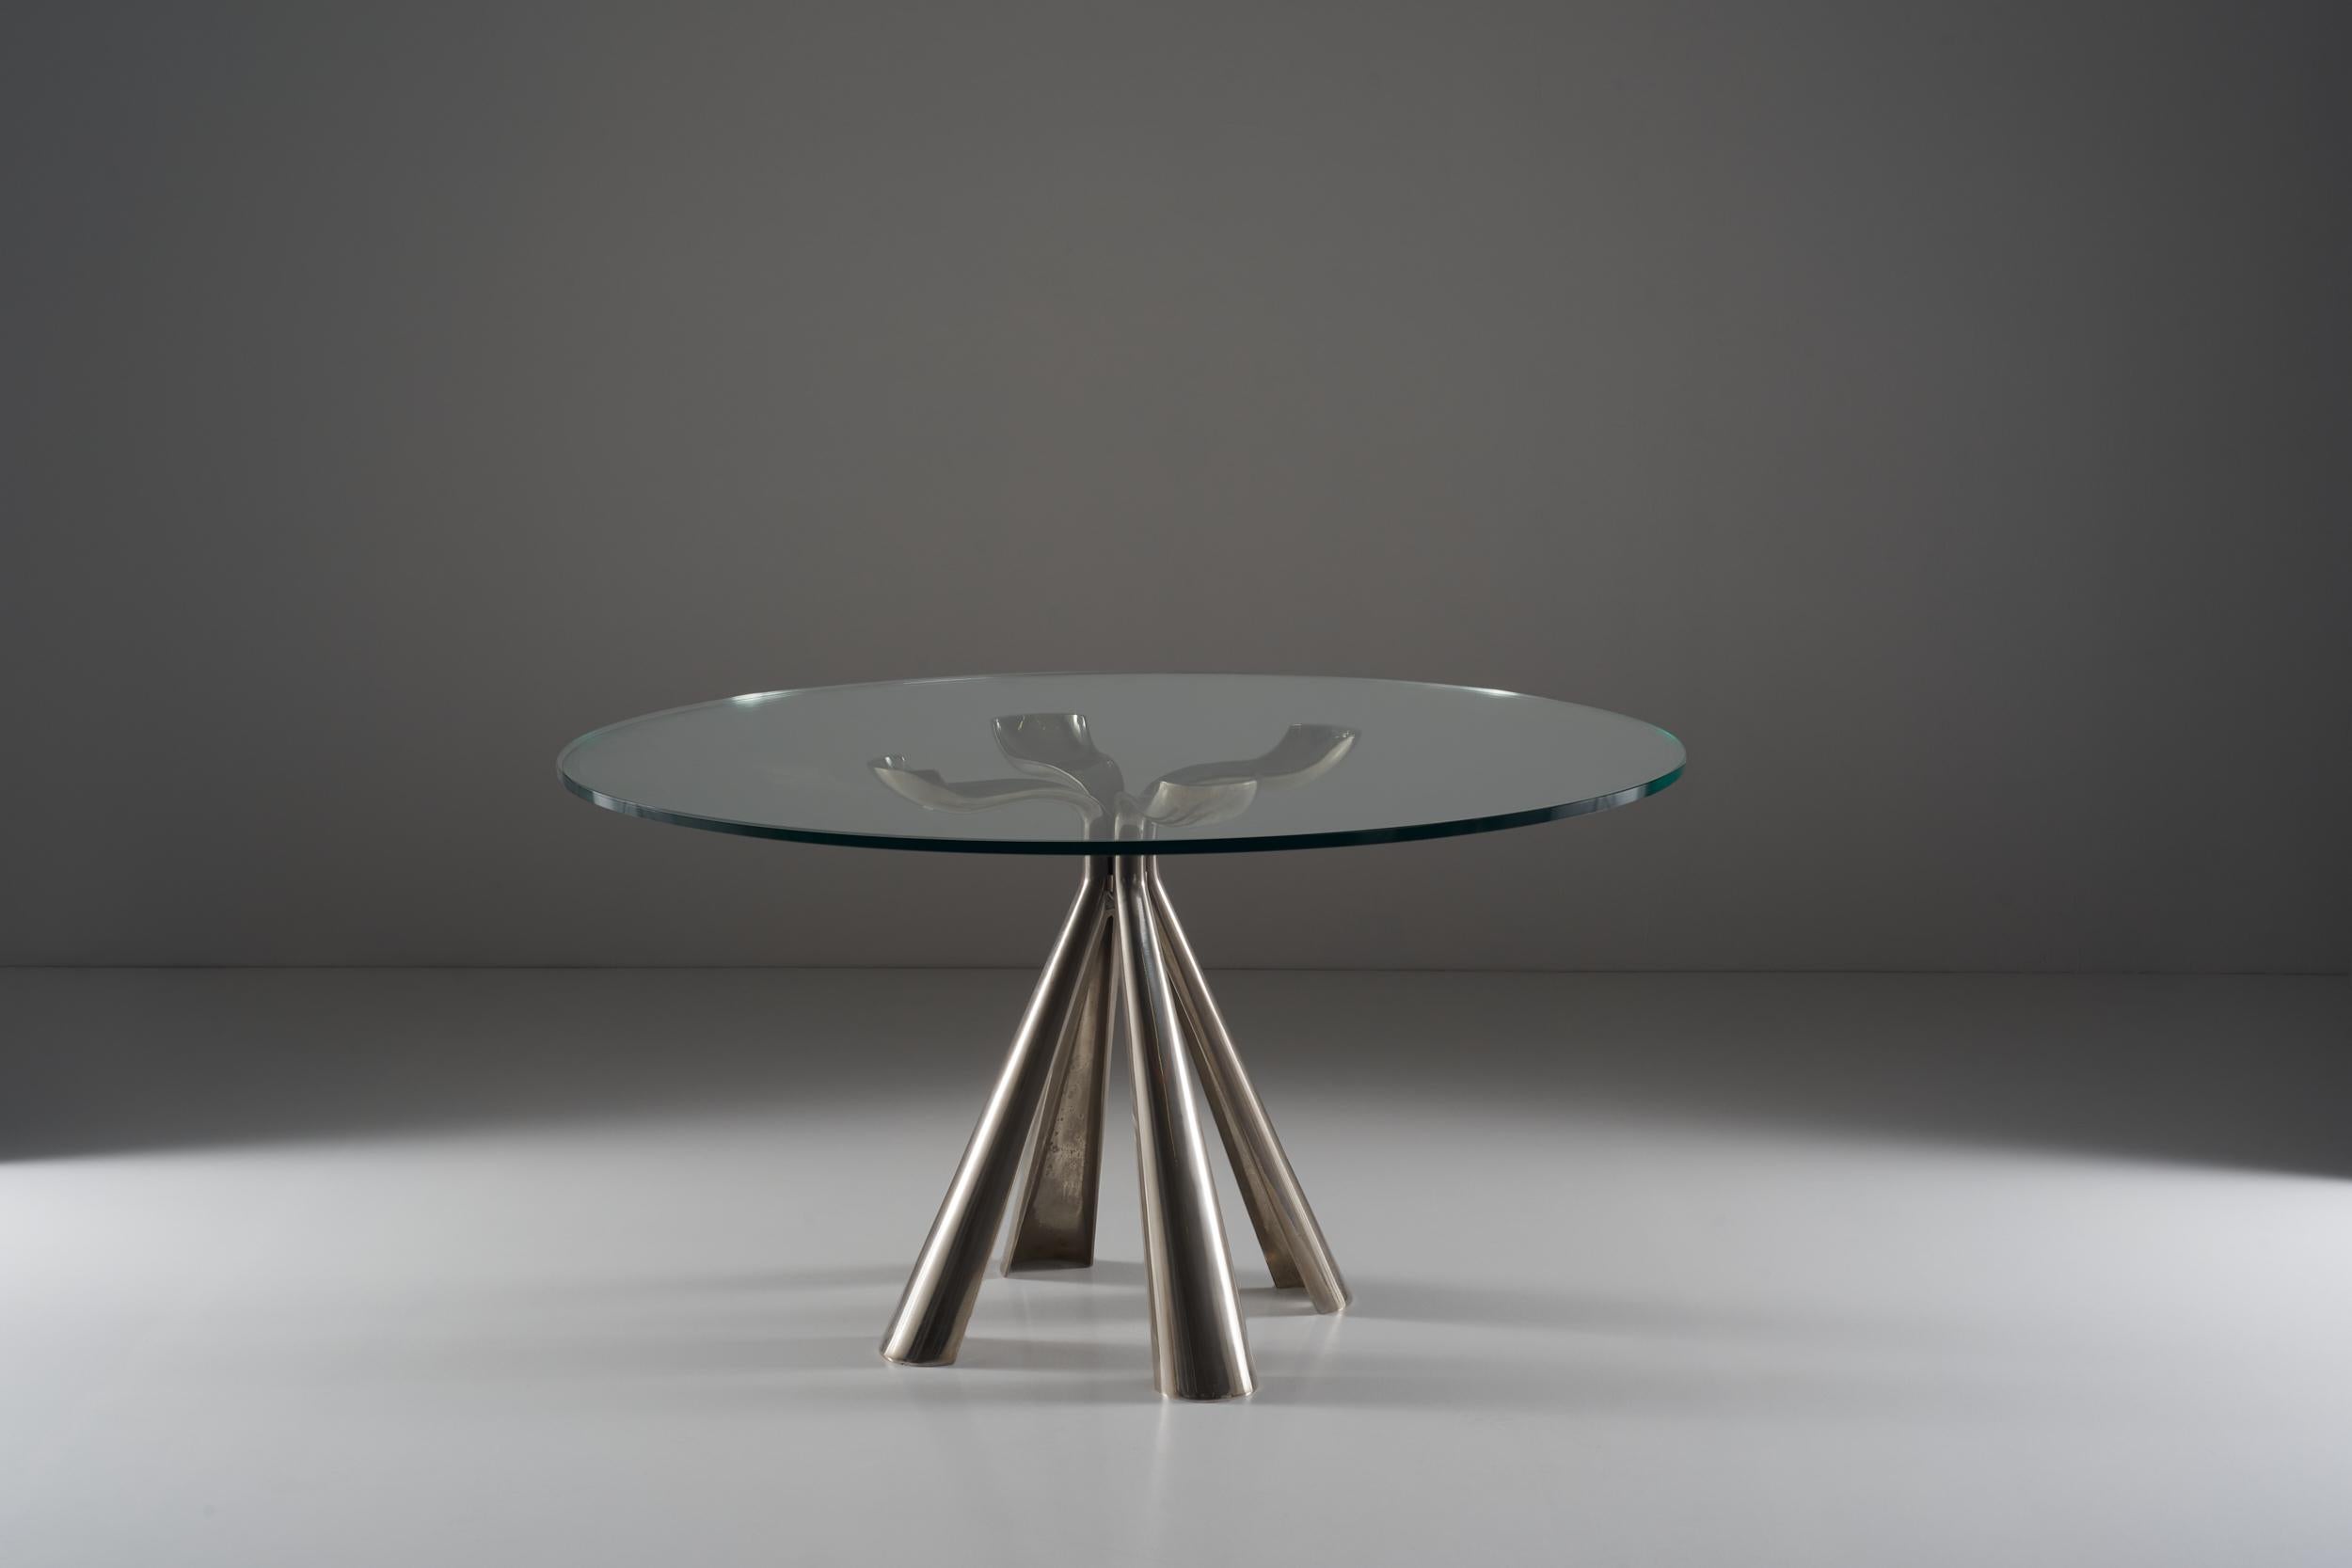 The table mod. Colby designed by Introini and producted by Saporiti in the 1970s is an extremely compressed table, the die-cast steel legs are shaped according to a flexed and narrow shape in the central-upper part while the two wider ones are